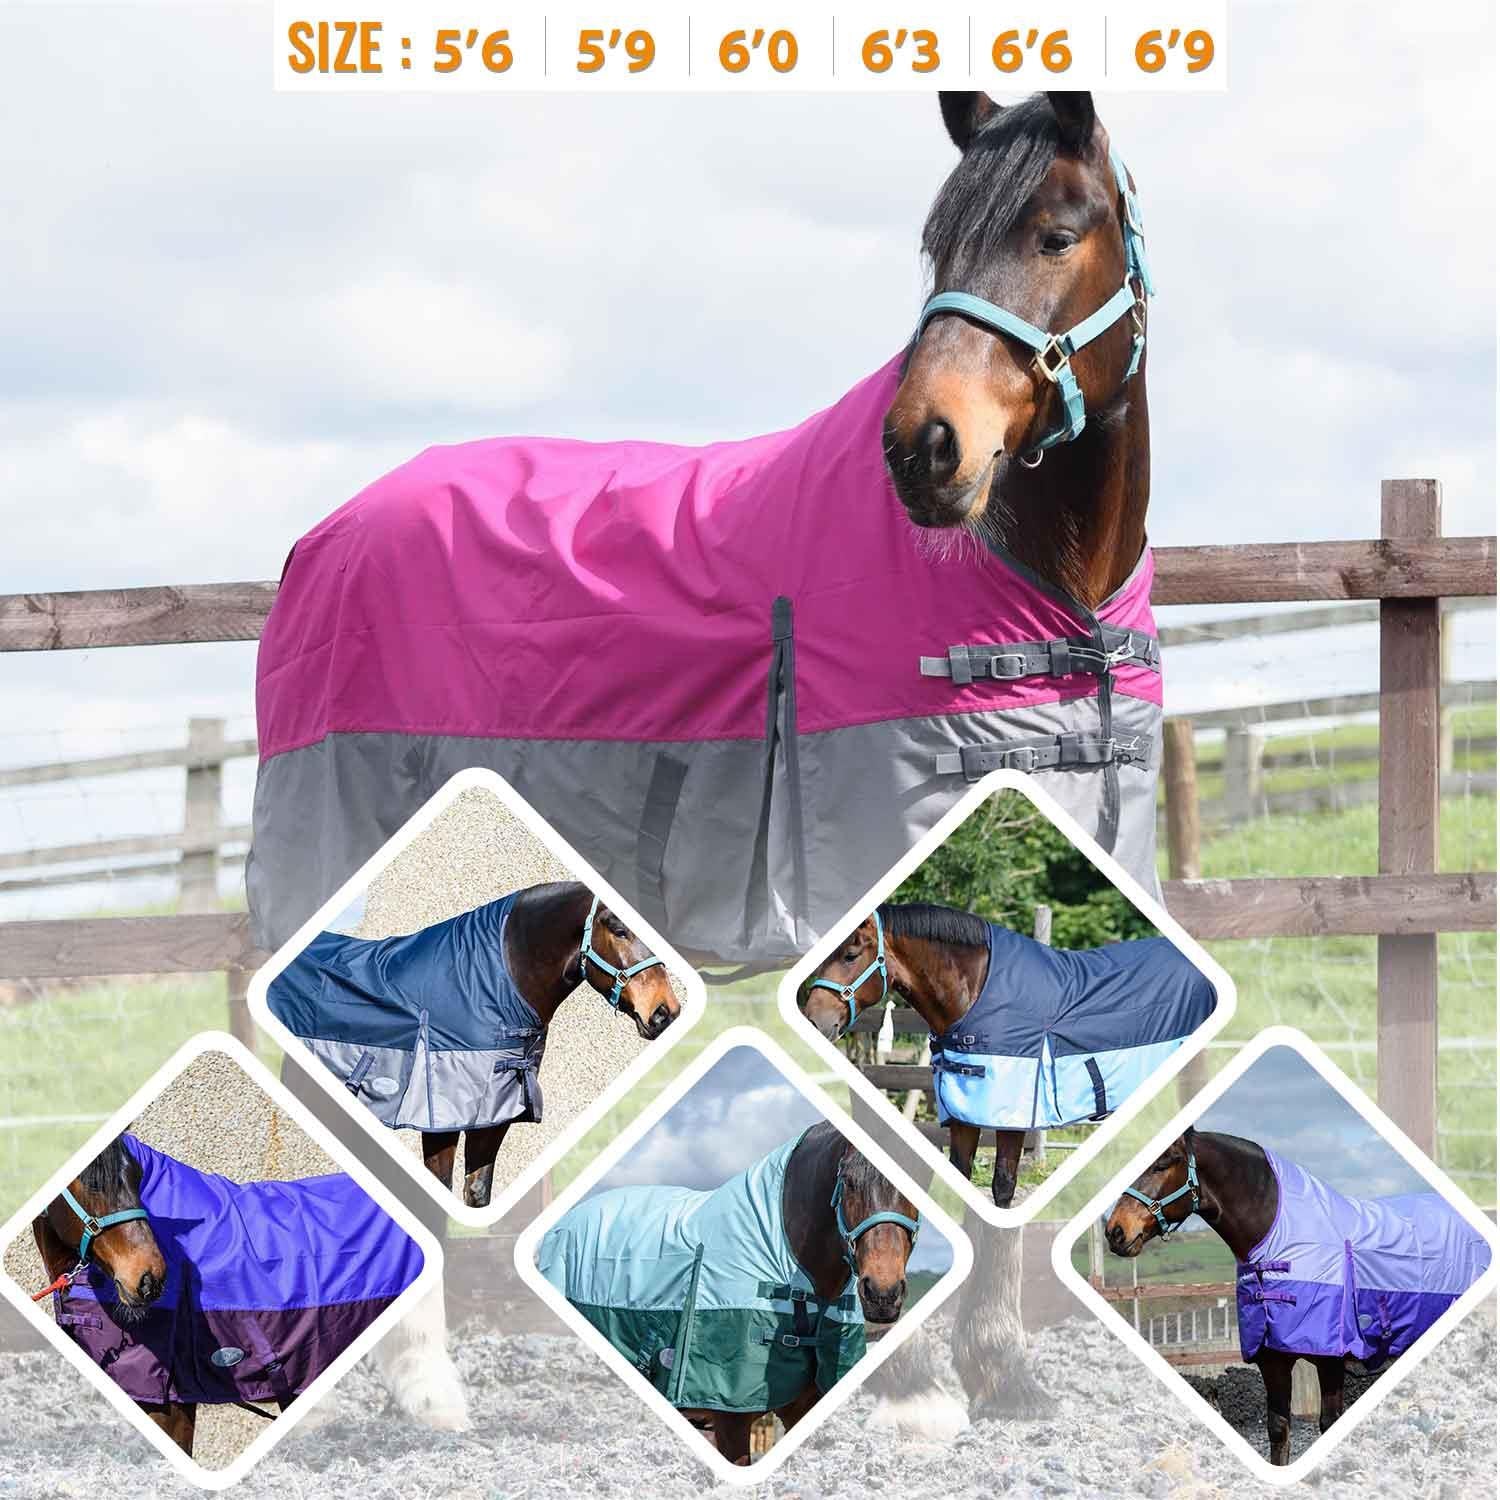 600 Denier 0g No Fill Lightweight Turnout Horse Rugs Half Neck Coated 6 Colors